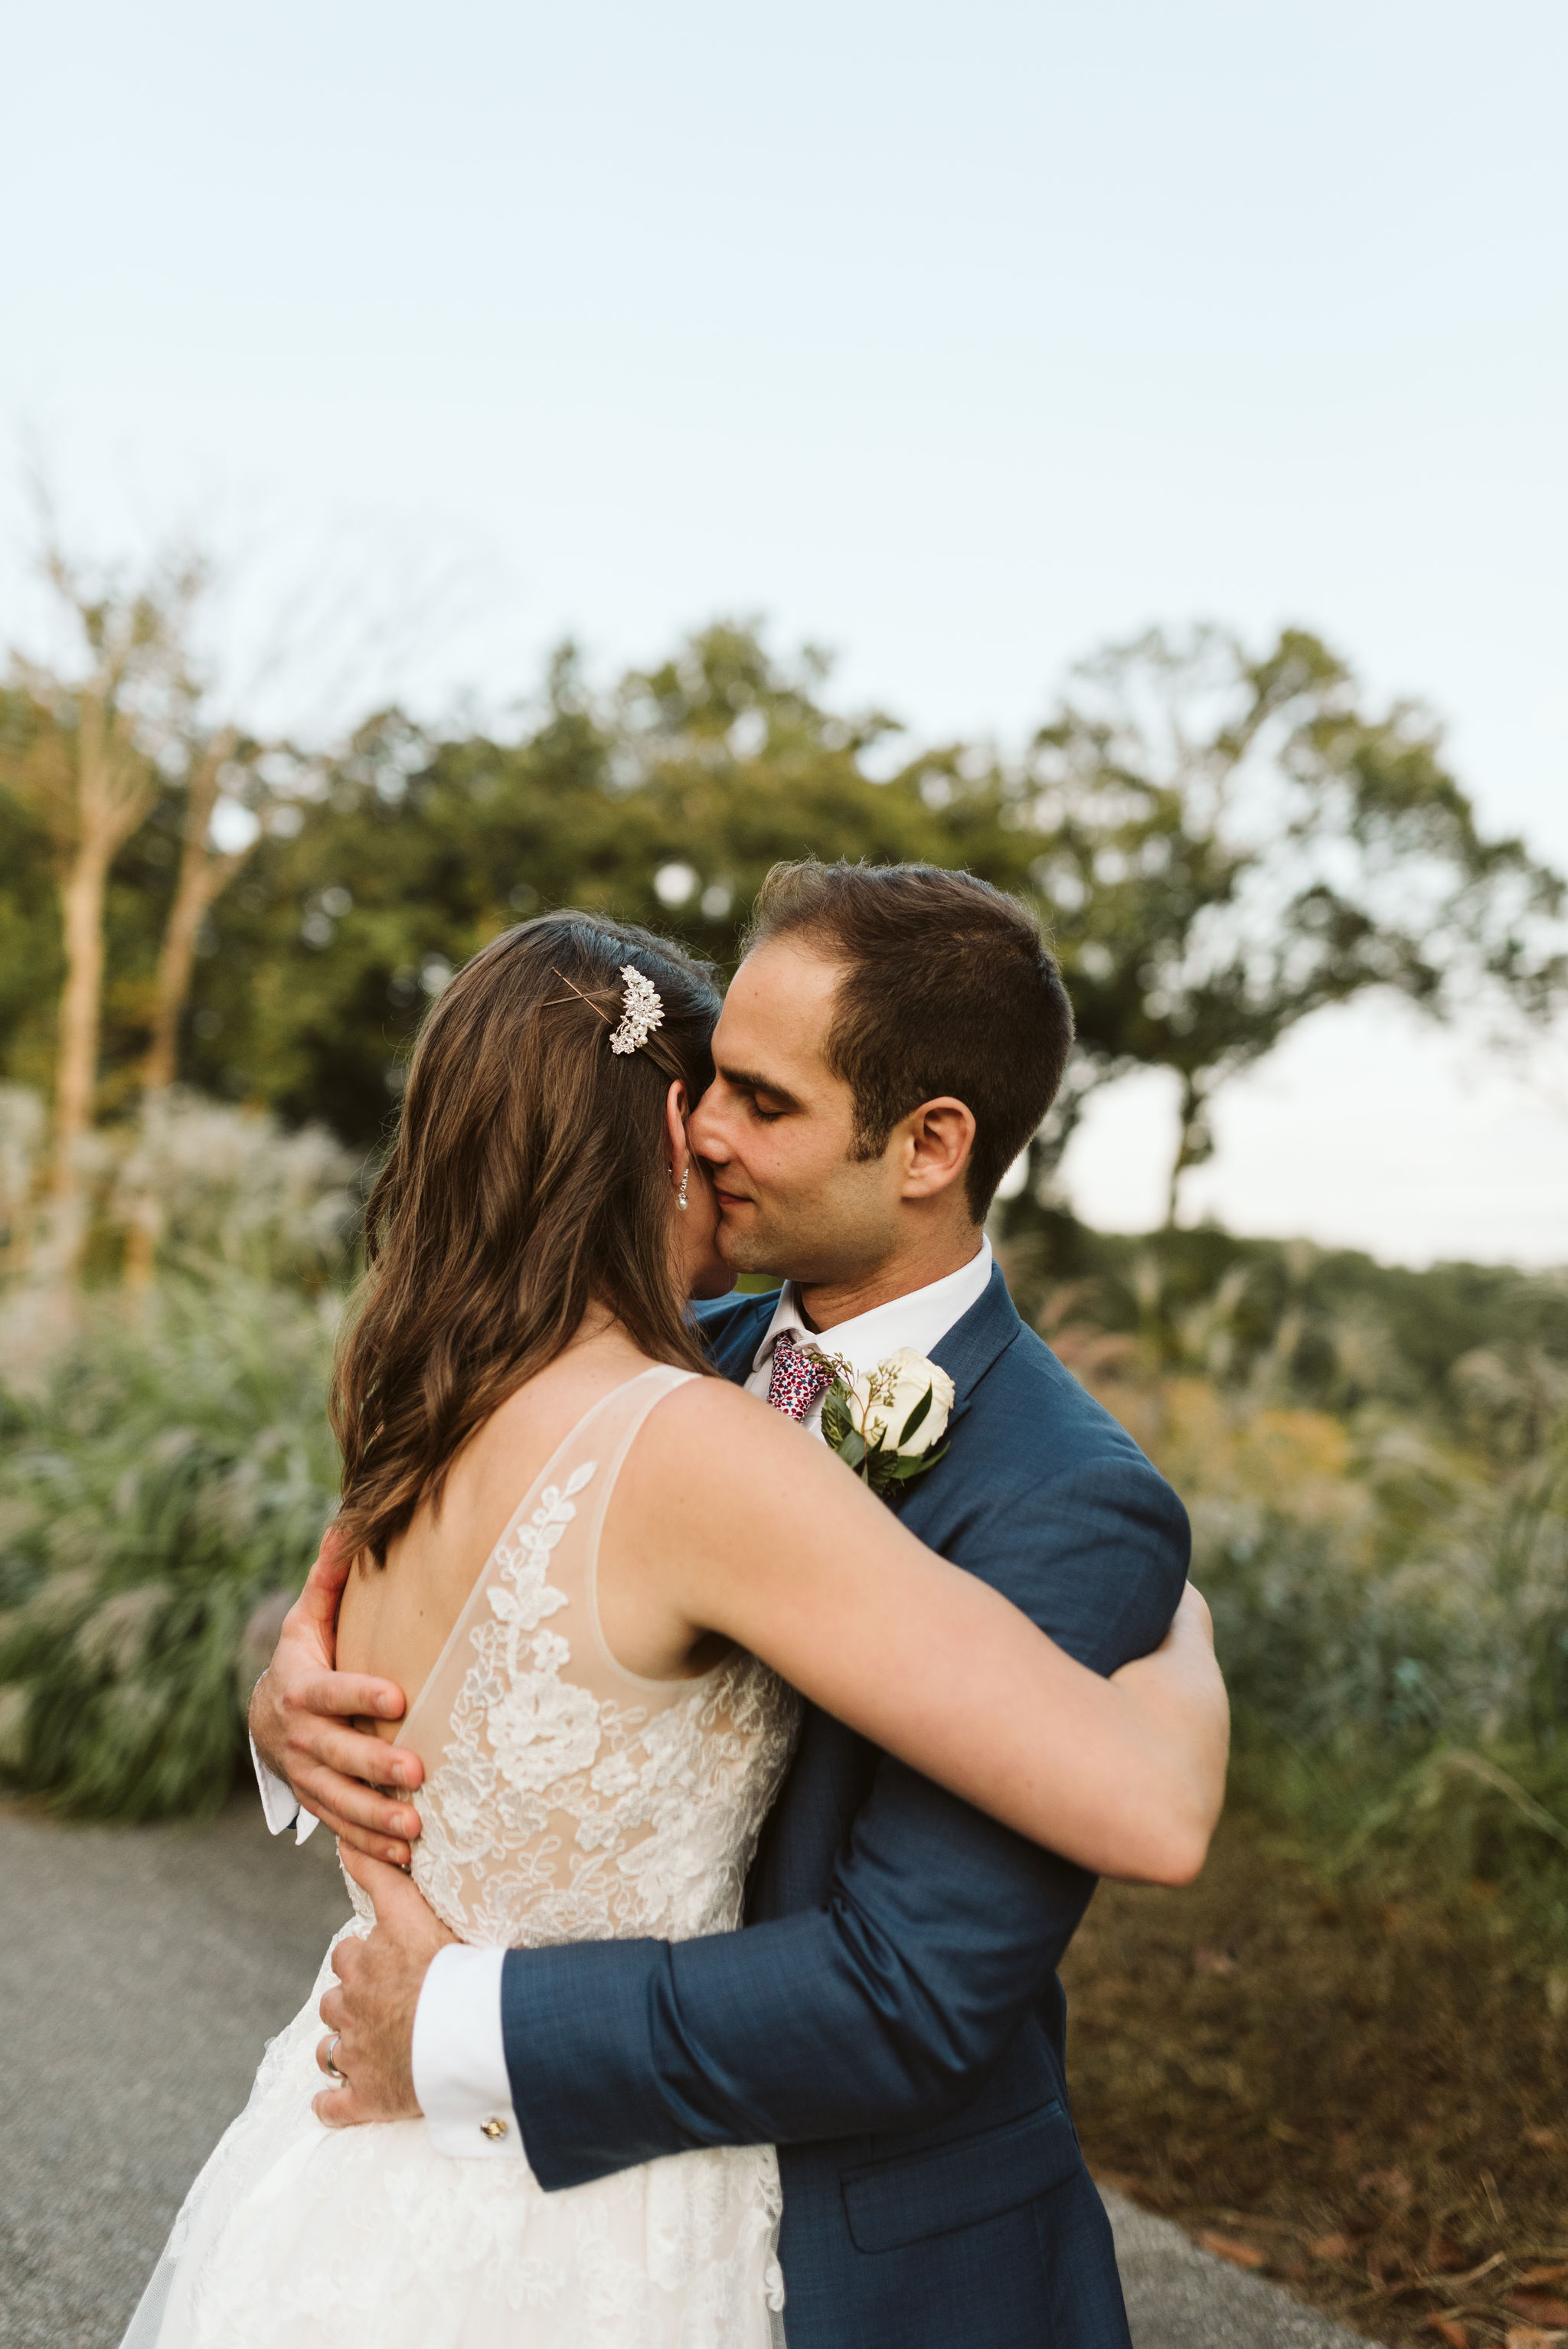  Phoenix Maryland, Baltimore Wedding Photographer, Eagle’s Nest Country Club, Classic, Romantic, Bride and Groom Hugging Sweetly, Lace Illusion Dress, Gaby Vinas Hair 